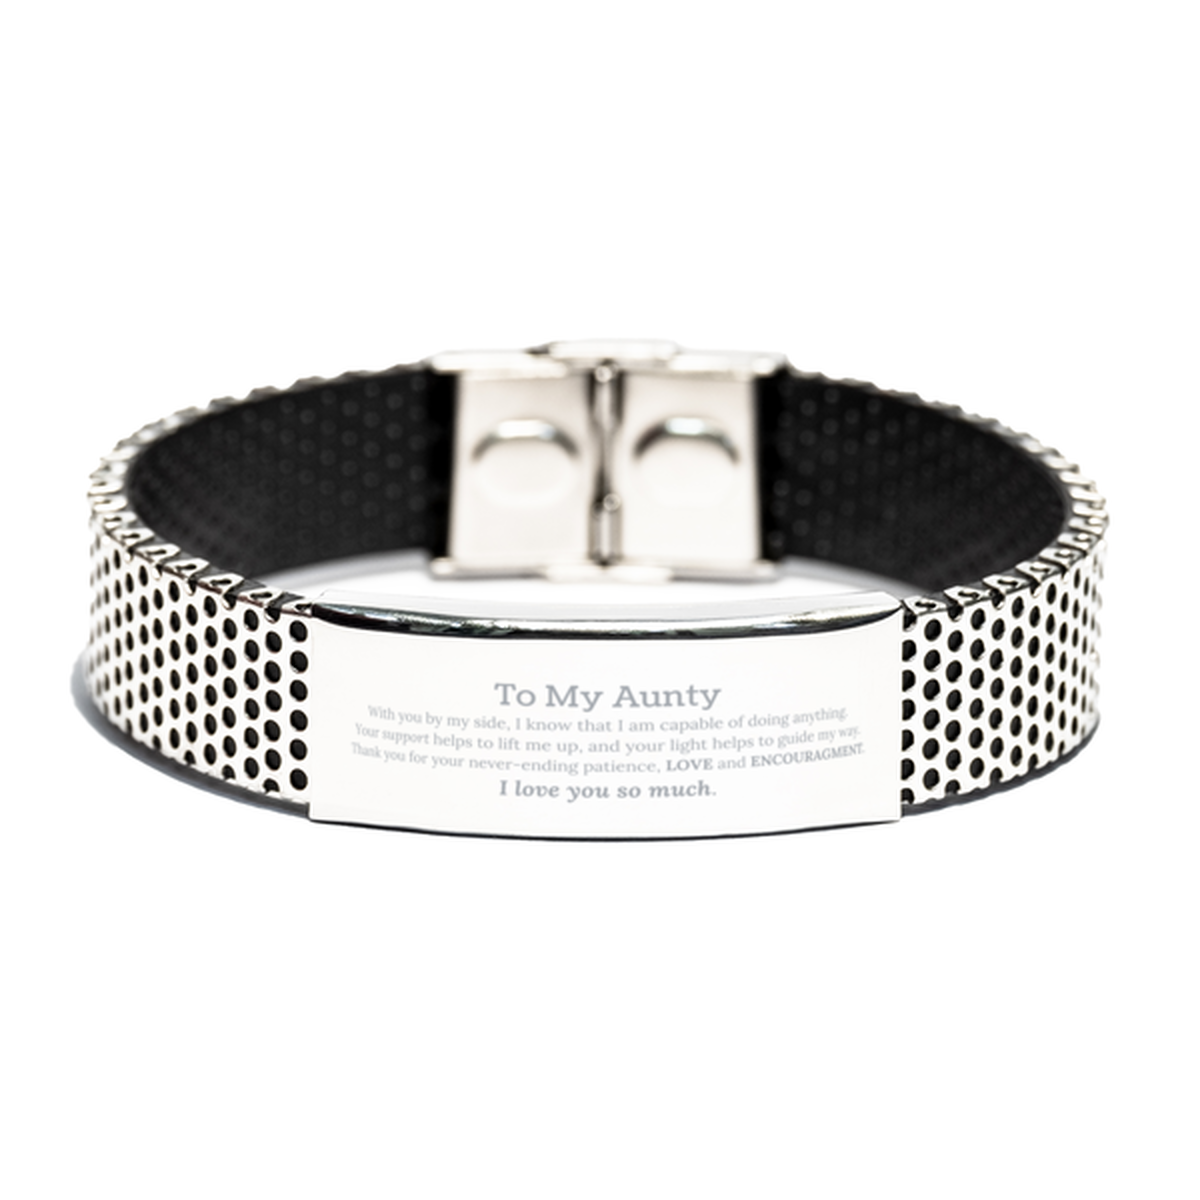 Appreciation Aunty Stainless Steel Bracelet Gifts, To My Aunty Birthday Christmas Wedding Keepsake Gifts for Aunty With you by my side, I know that I am capable of doing anything. I love you so much